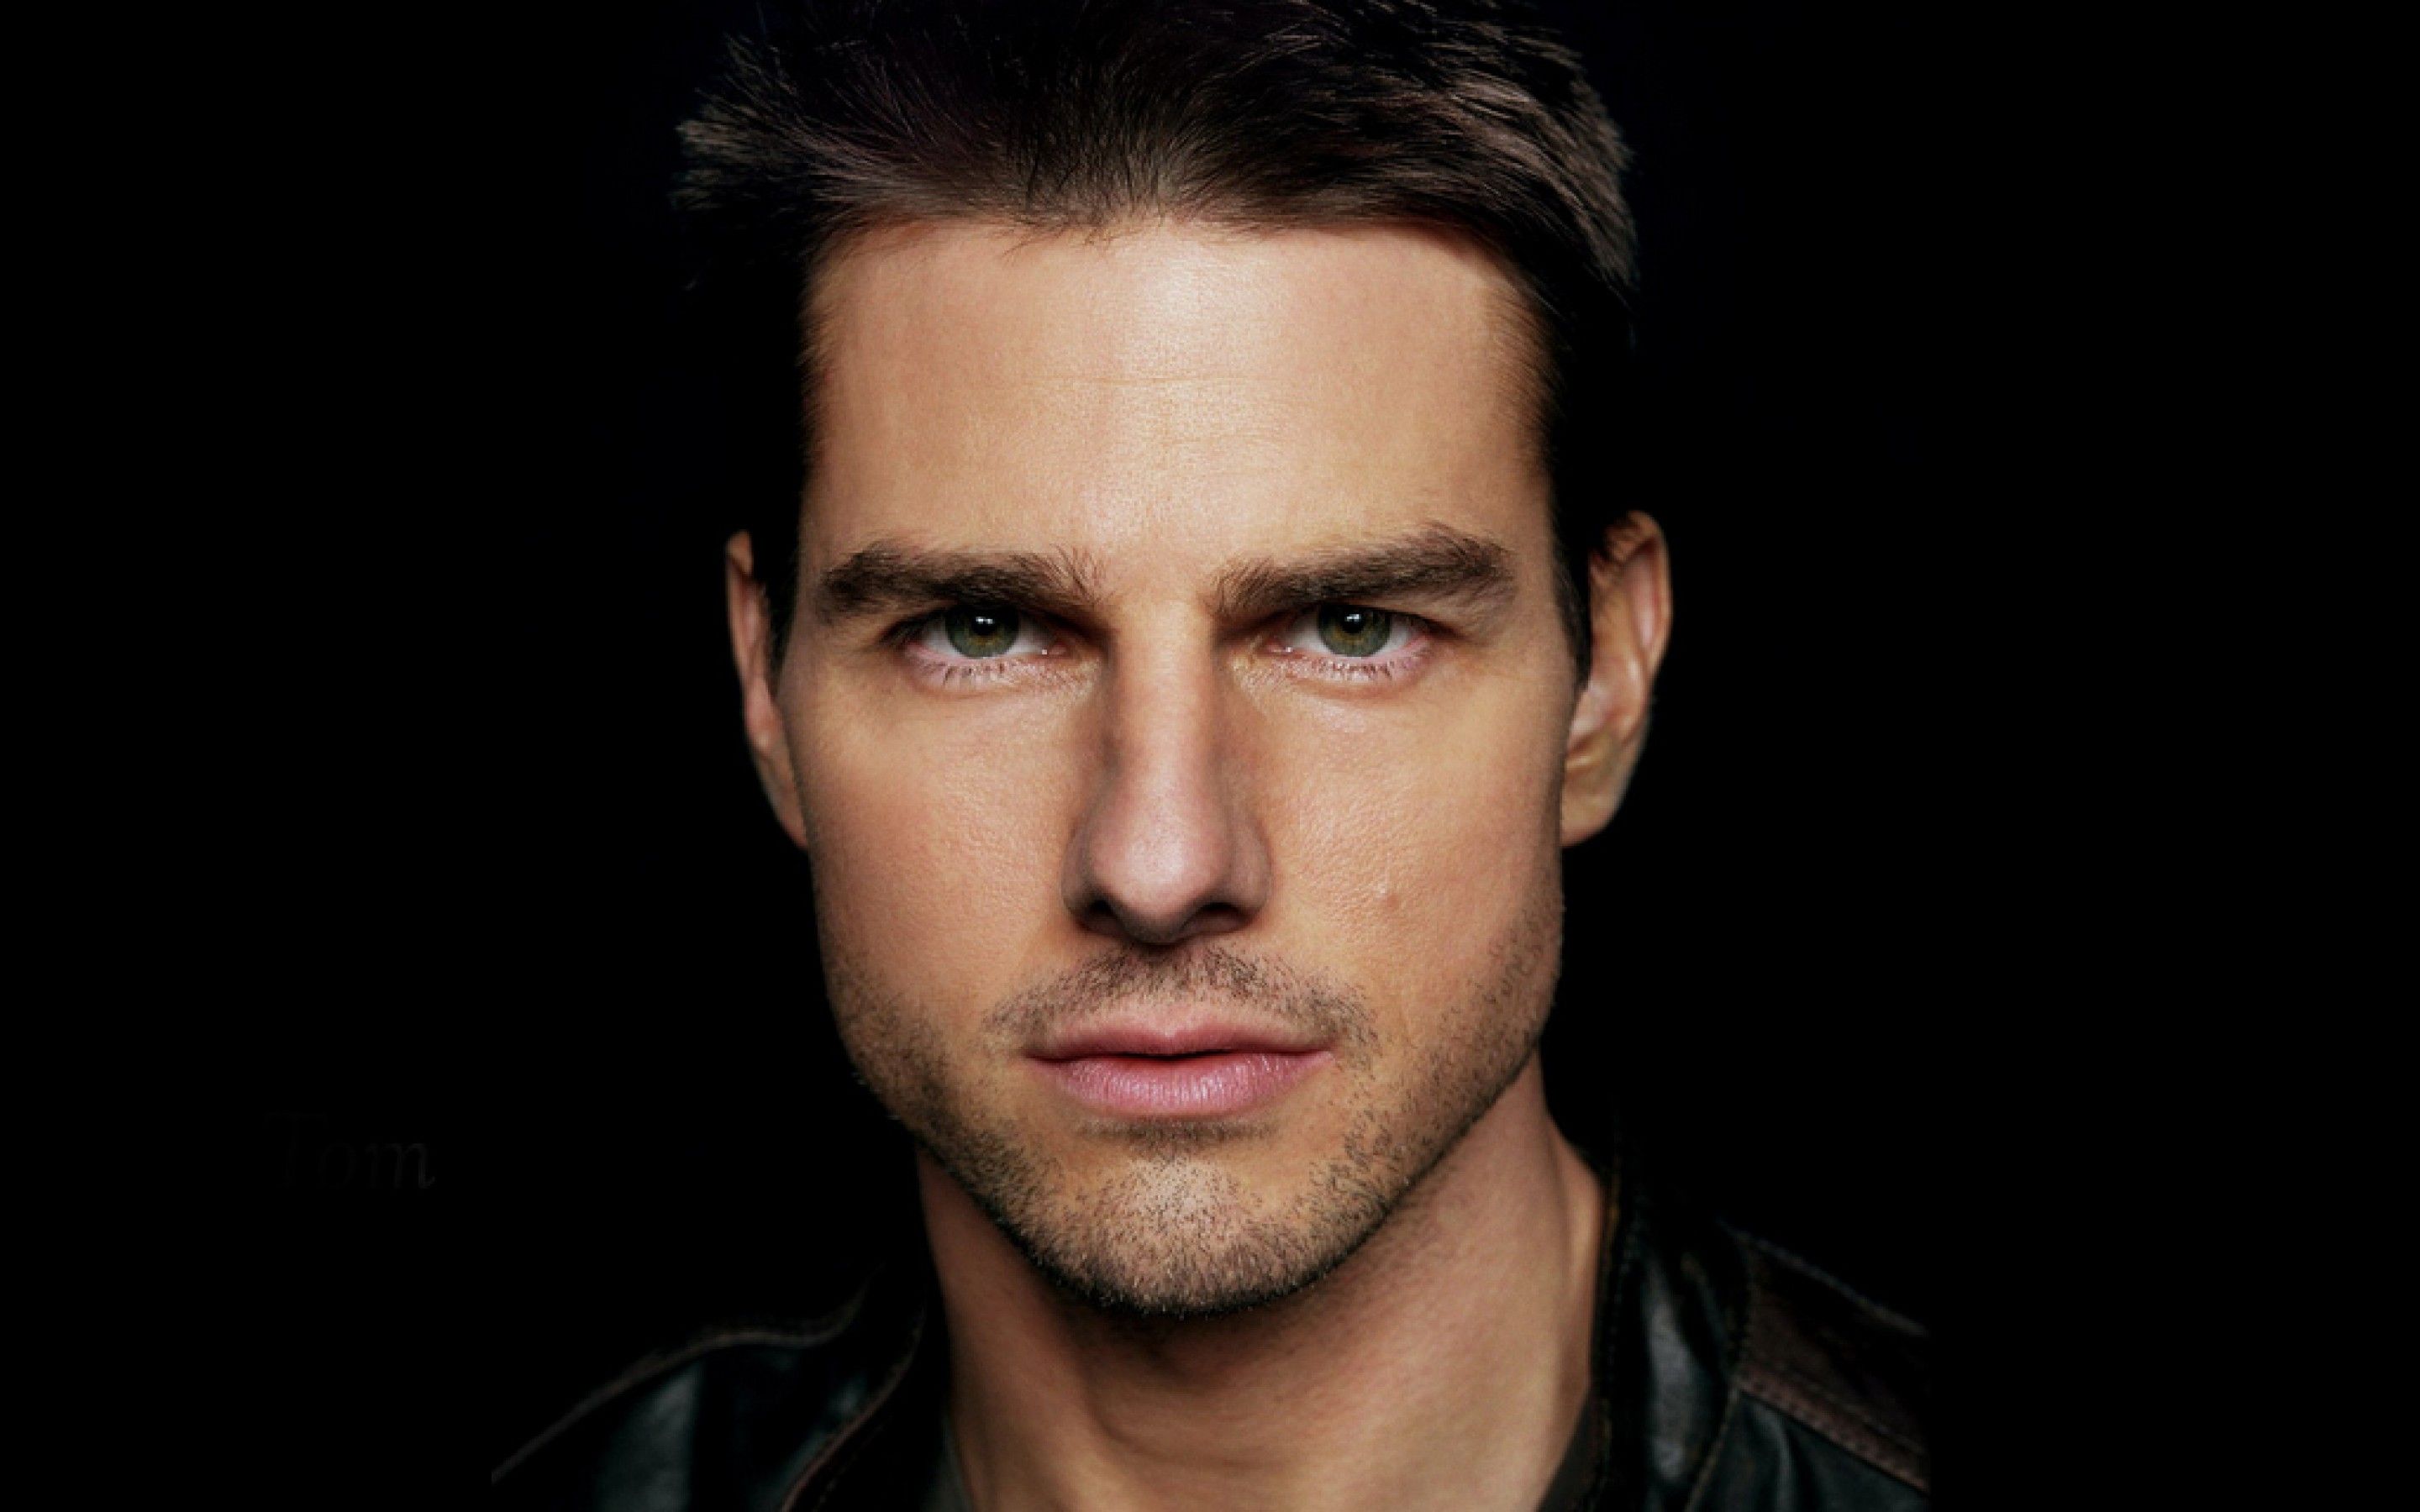 Tom Cruise Close up HD wallpaper iPhone 6 plus Wallpaper, HD Celebrities 4K Wallpaper, Image, Photo and Background